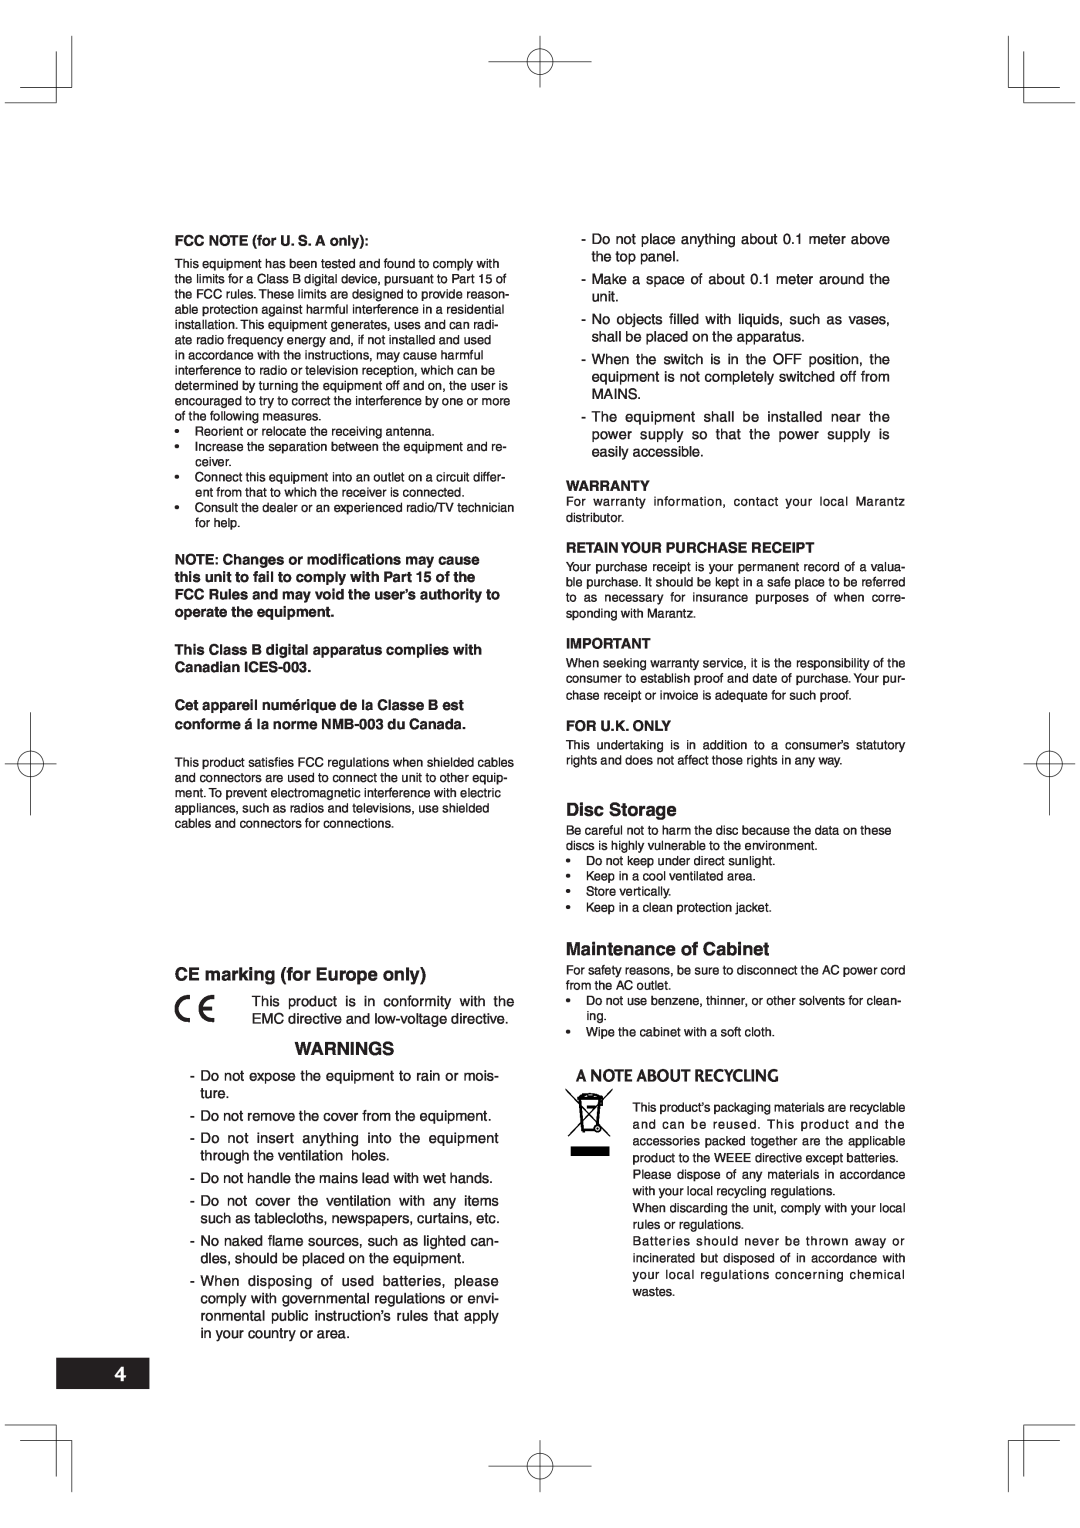 Marantz VC6001 manual CE marking for Europe only, Warnings, Disc Storage, Maintenance of Cabinet, A Note About Recycling 